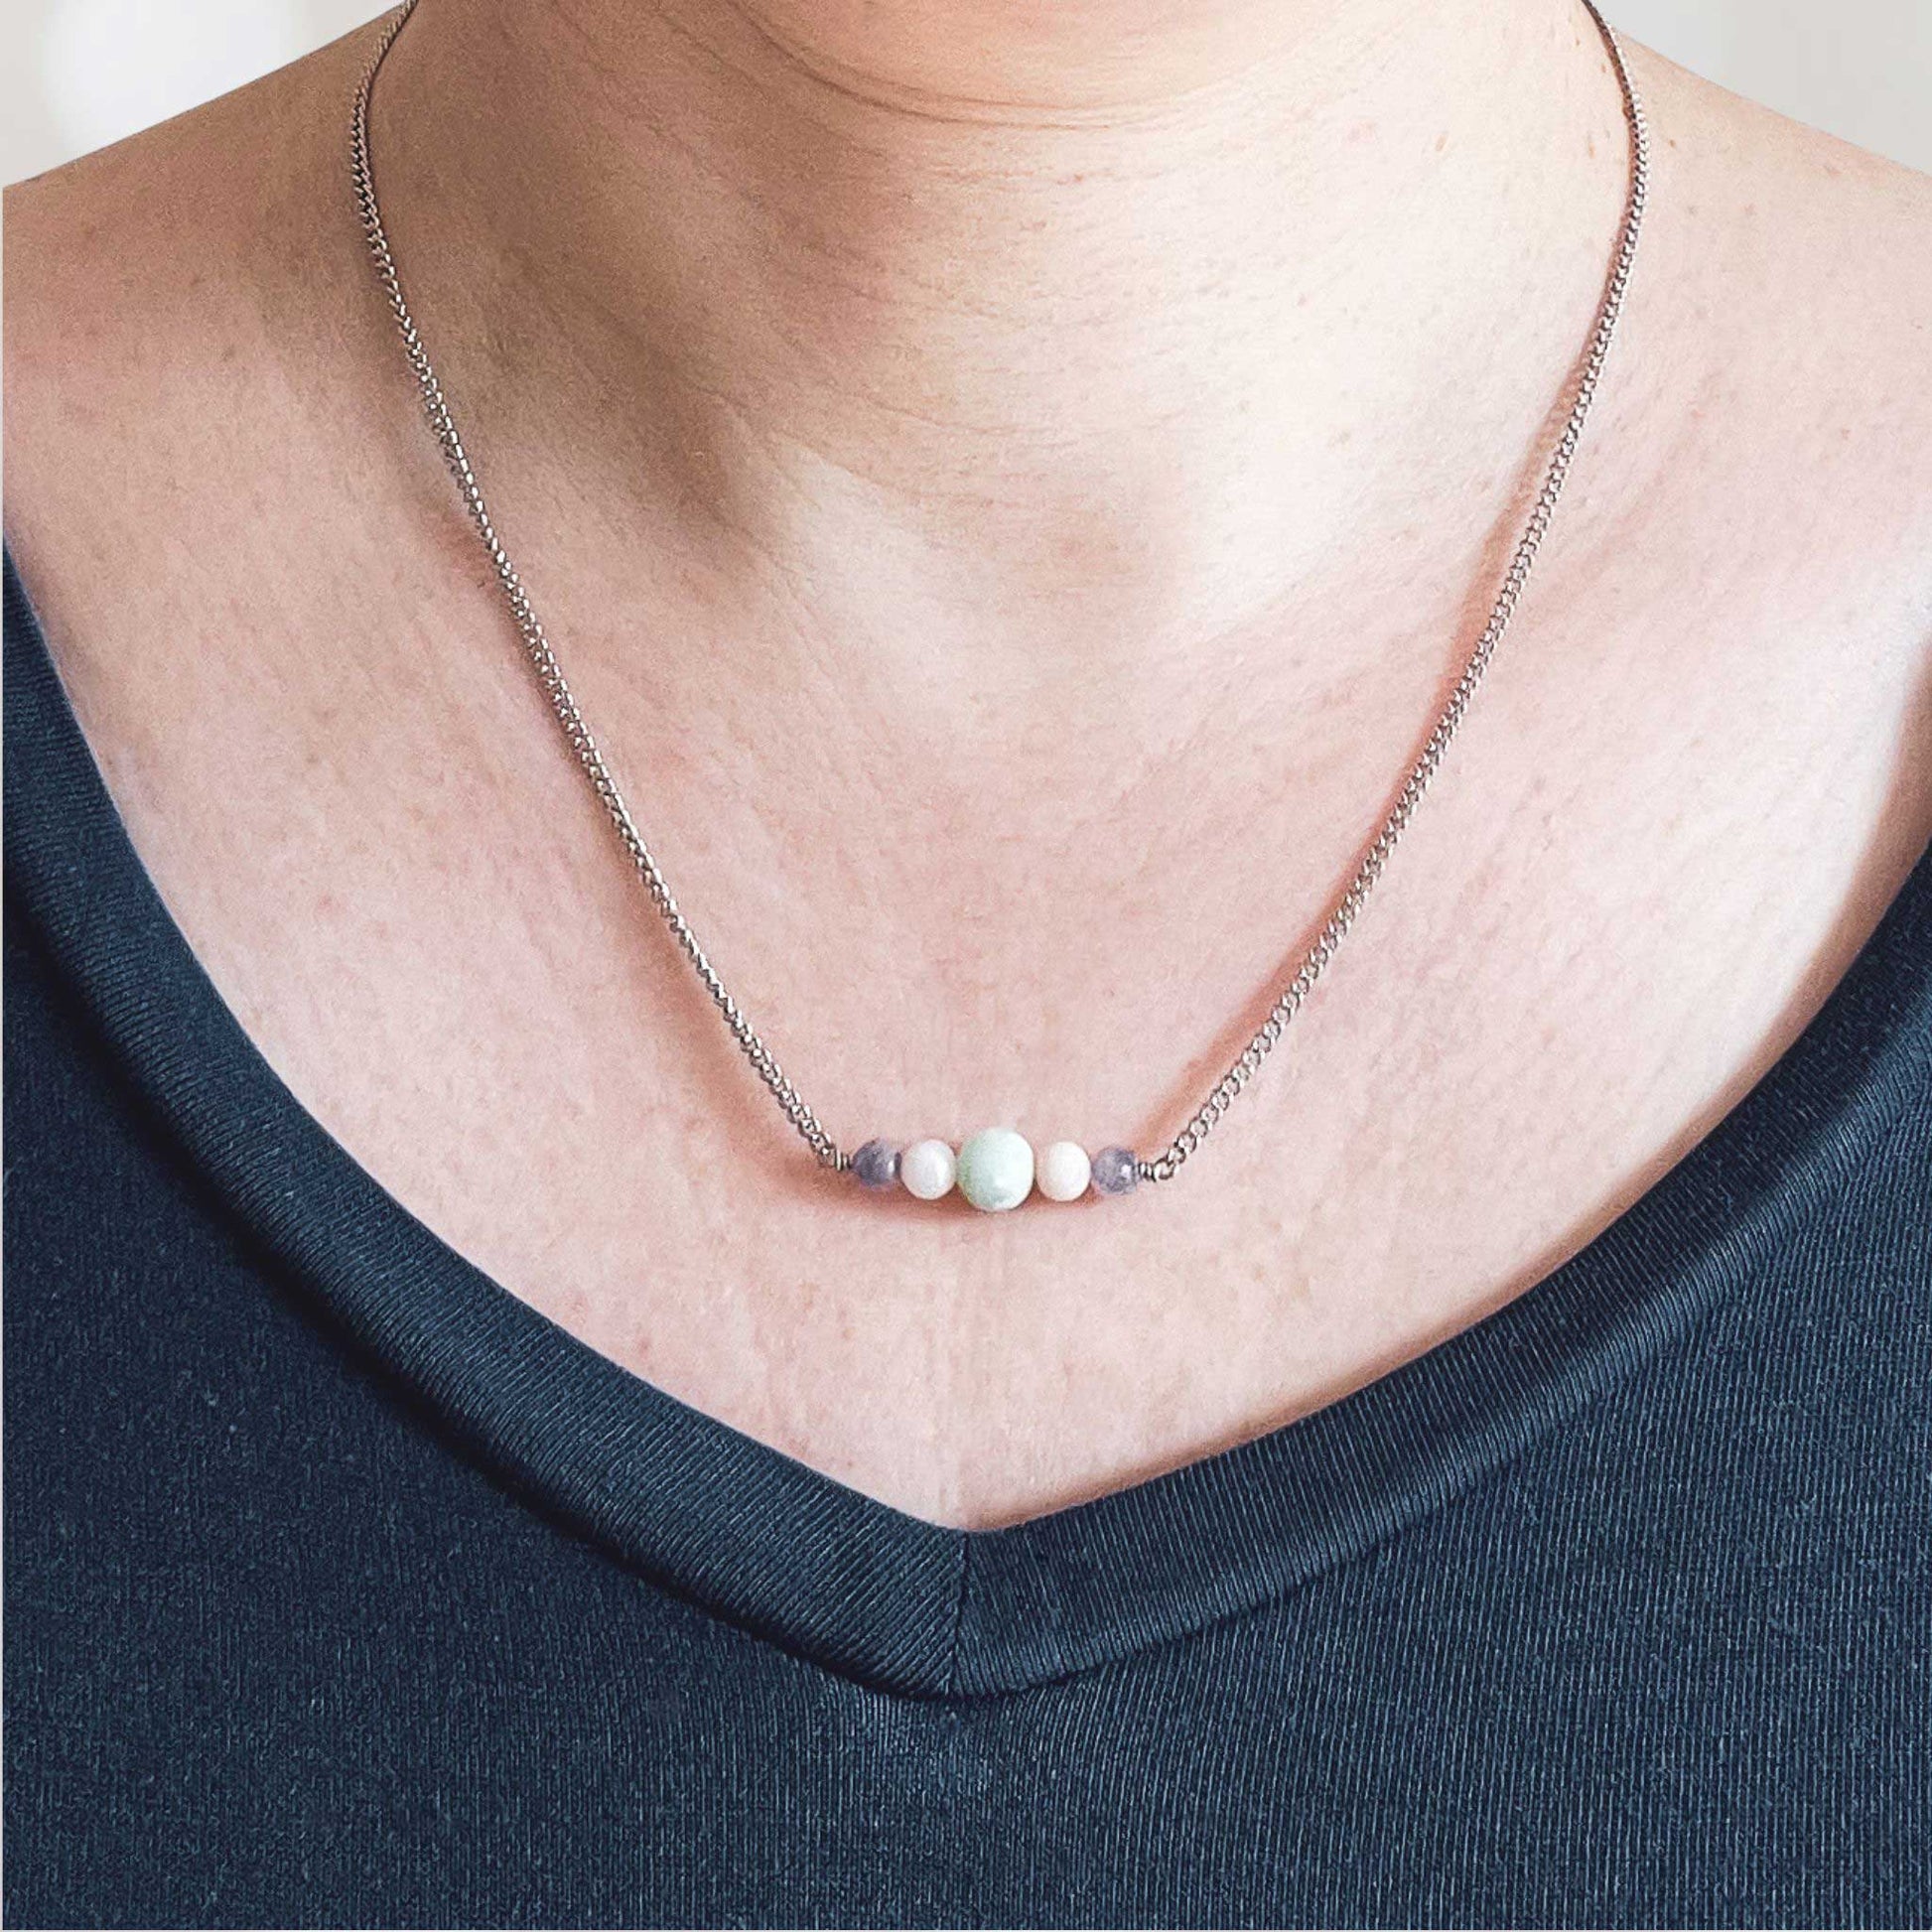 Woman wearing dark blue v neck top and dainty pastel gemstone necklace